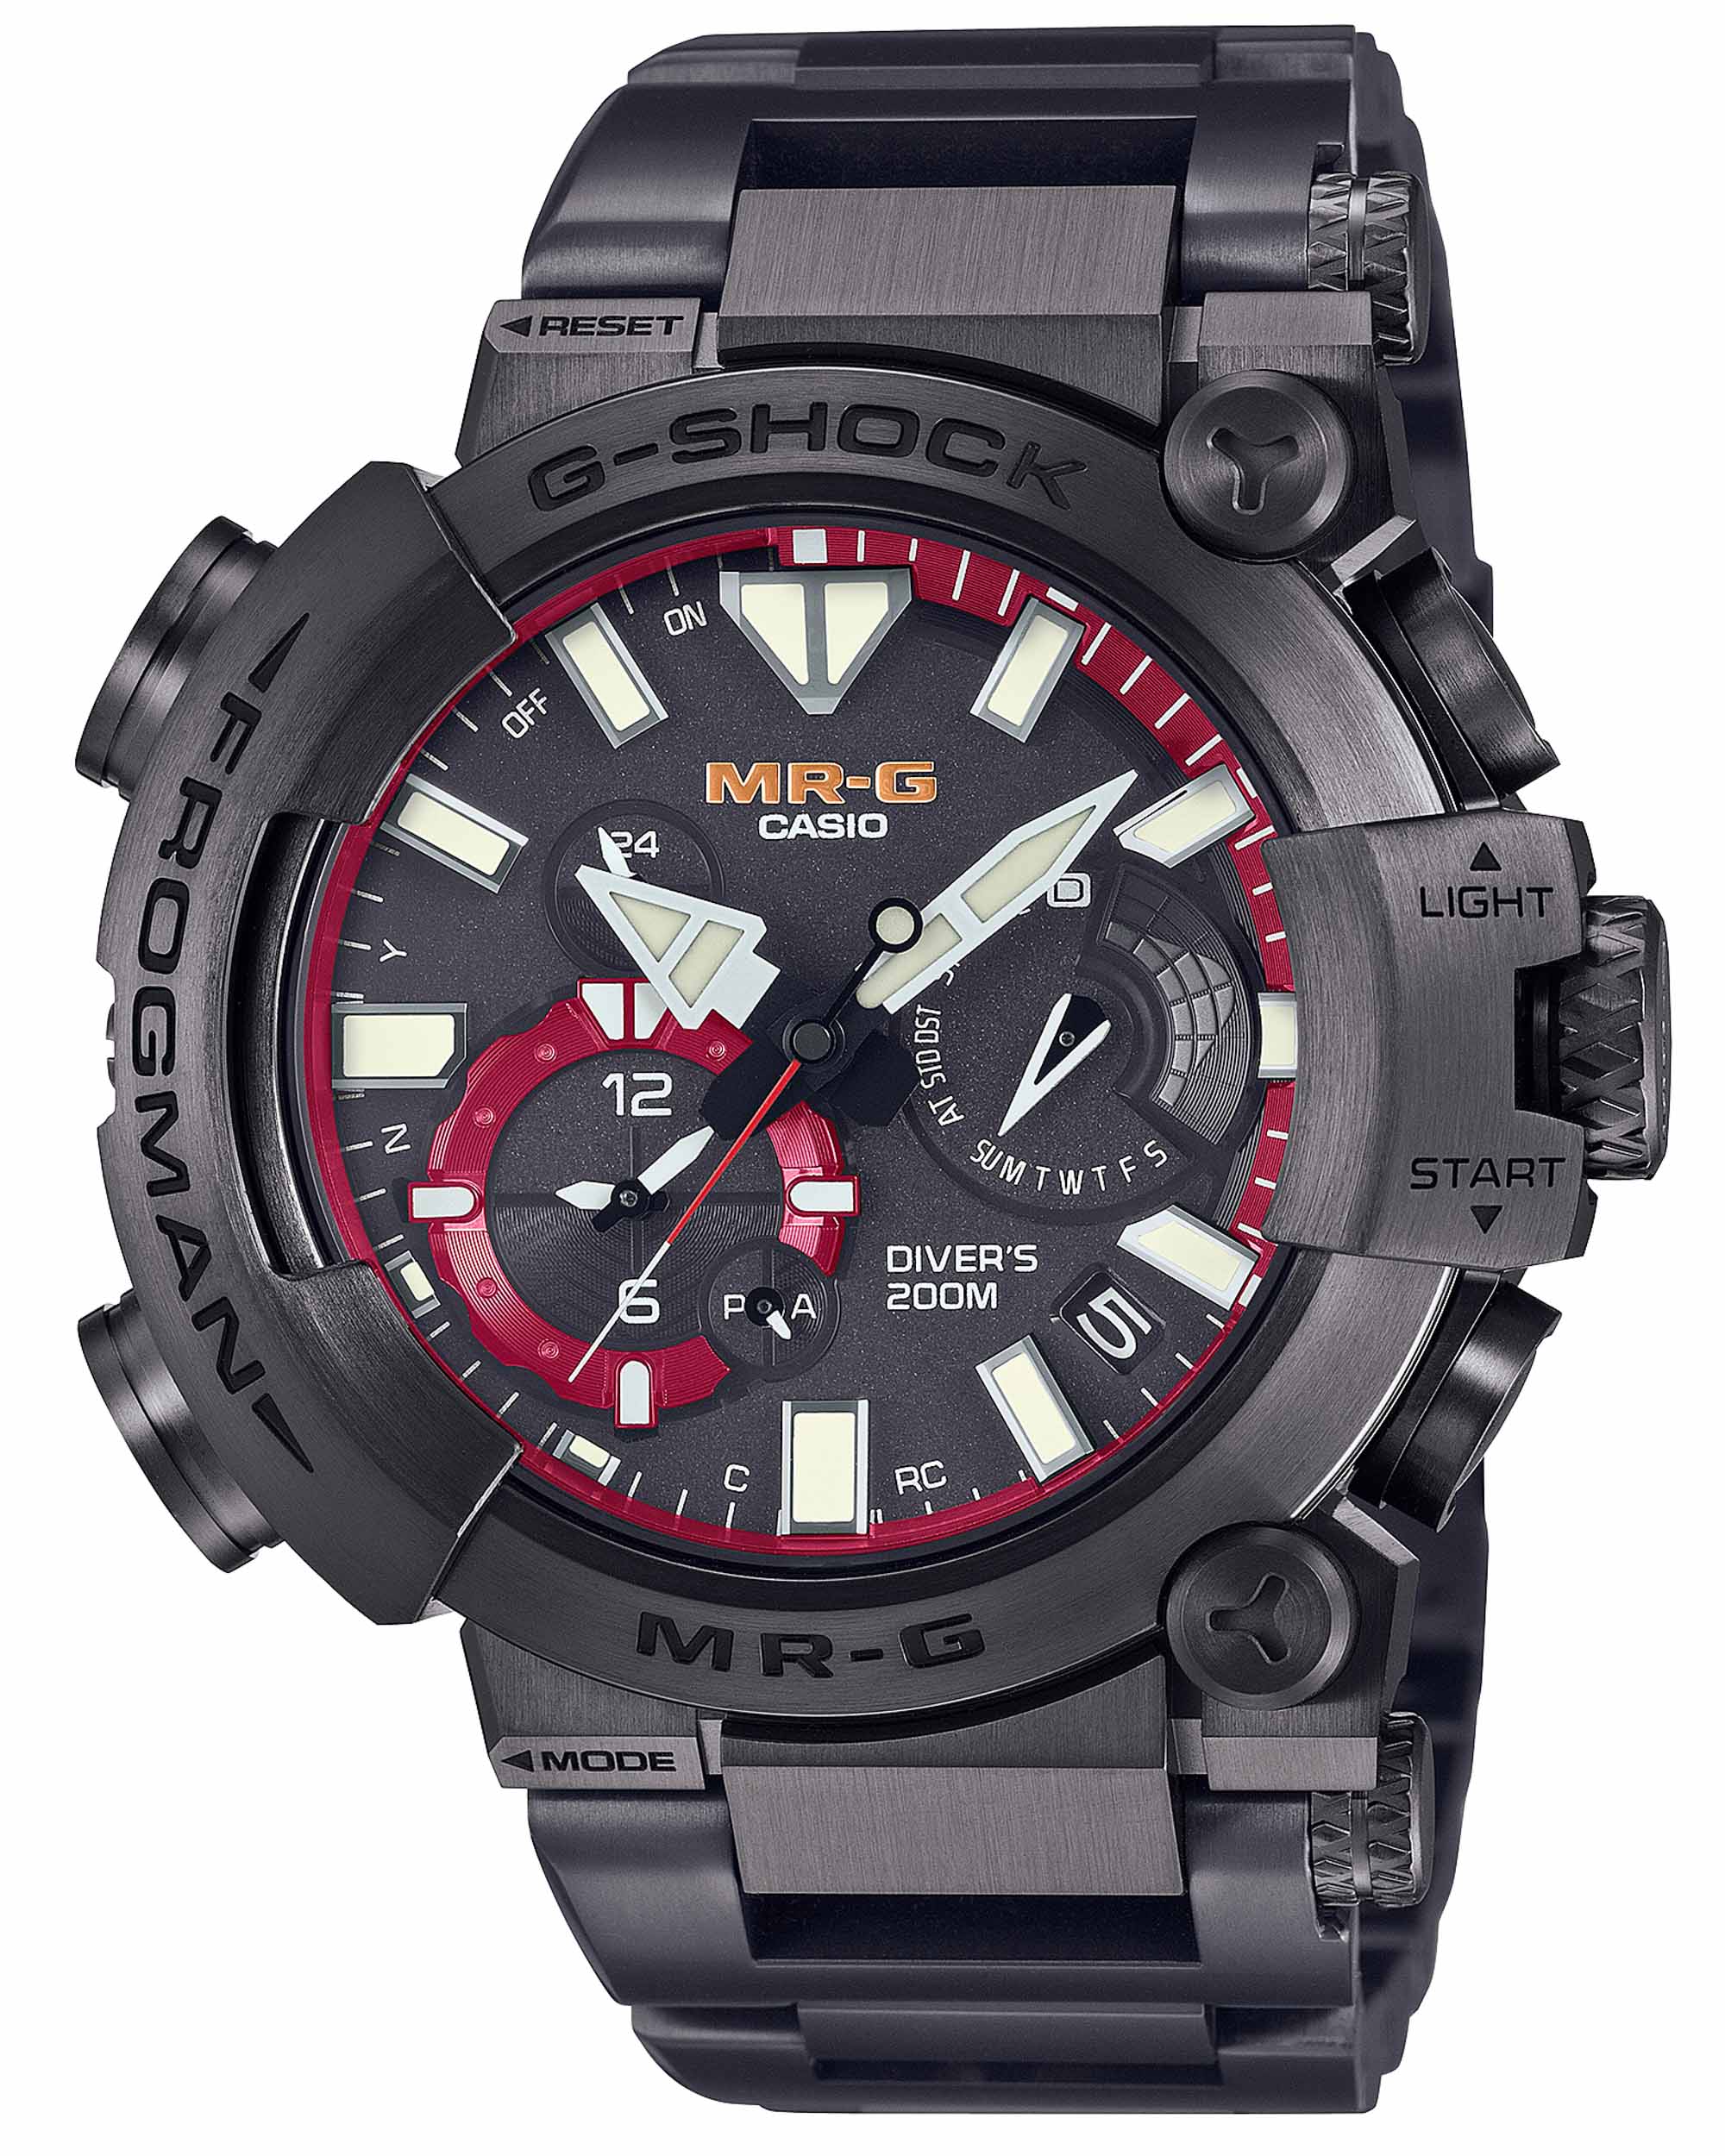 G-Shock's new MR-G Frogman gets a titanium upgrade - The Manual